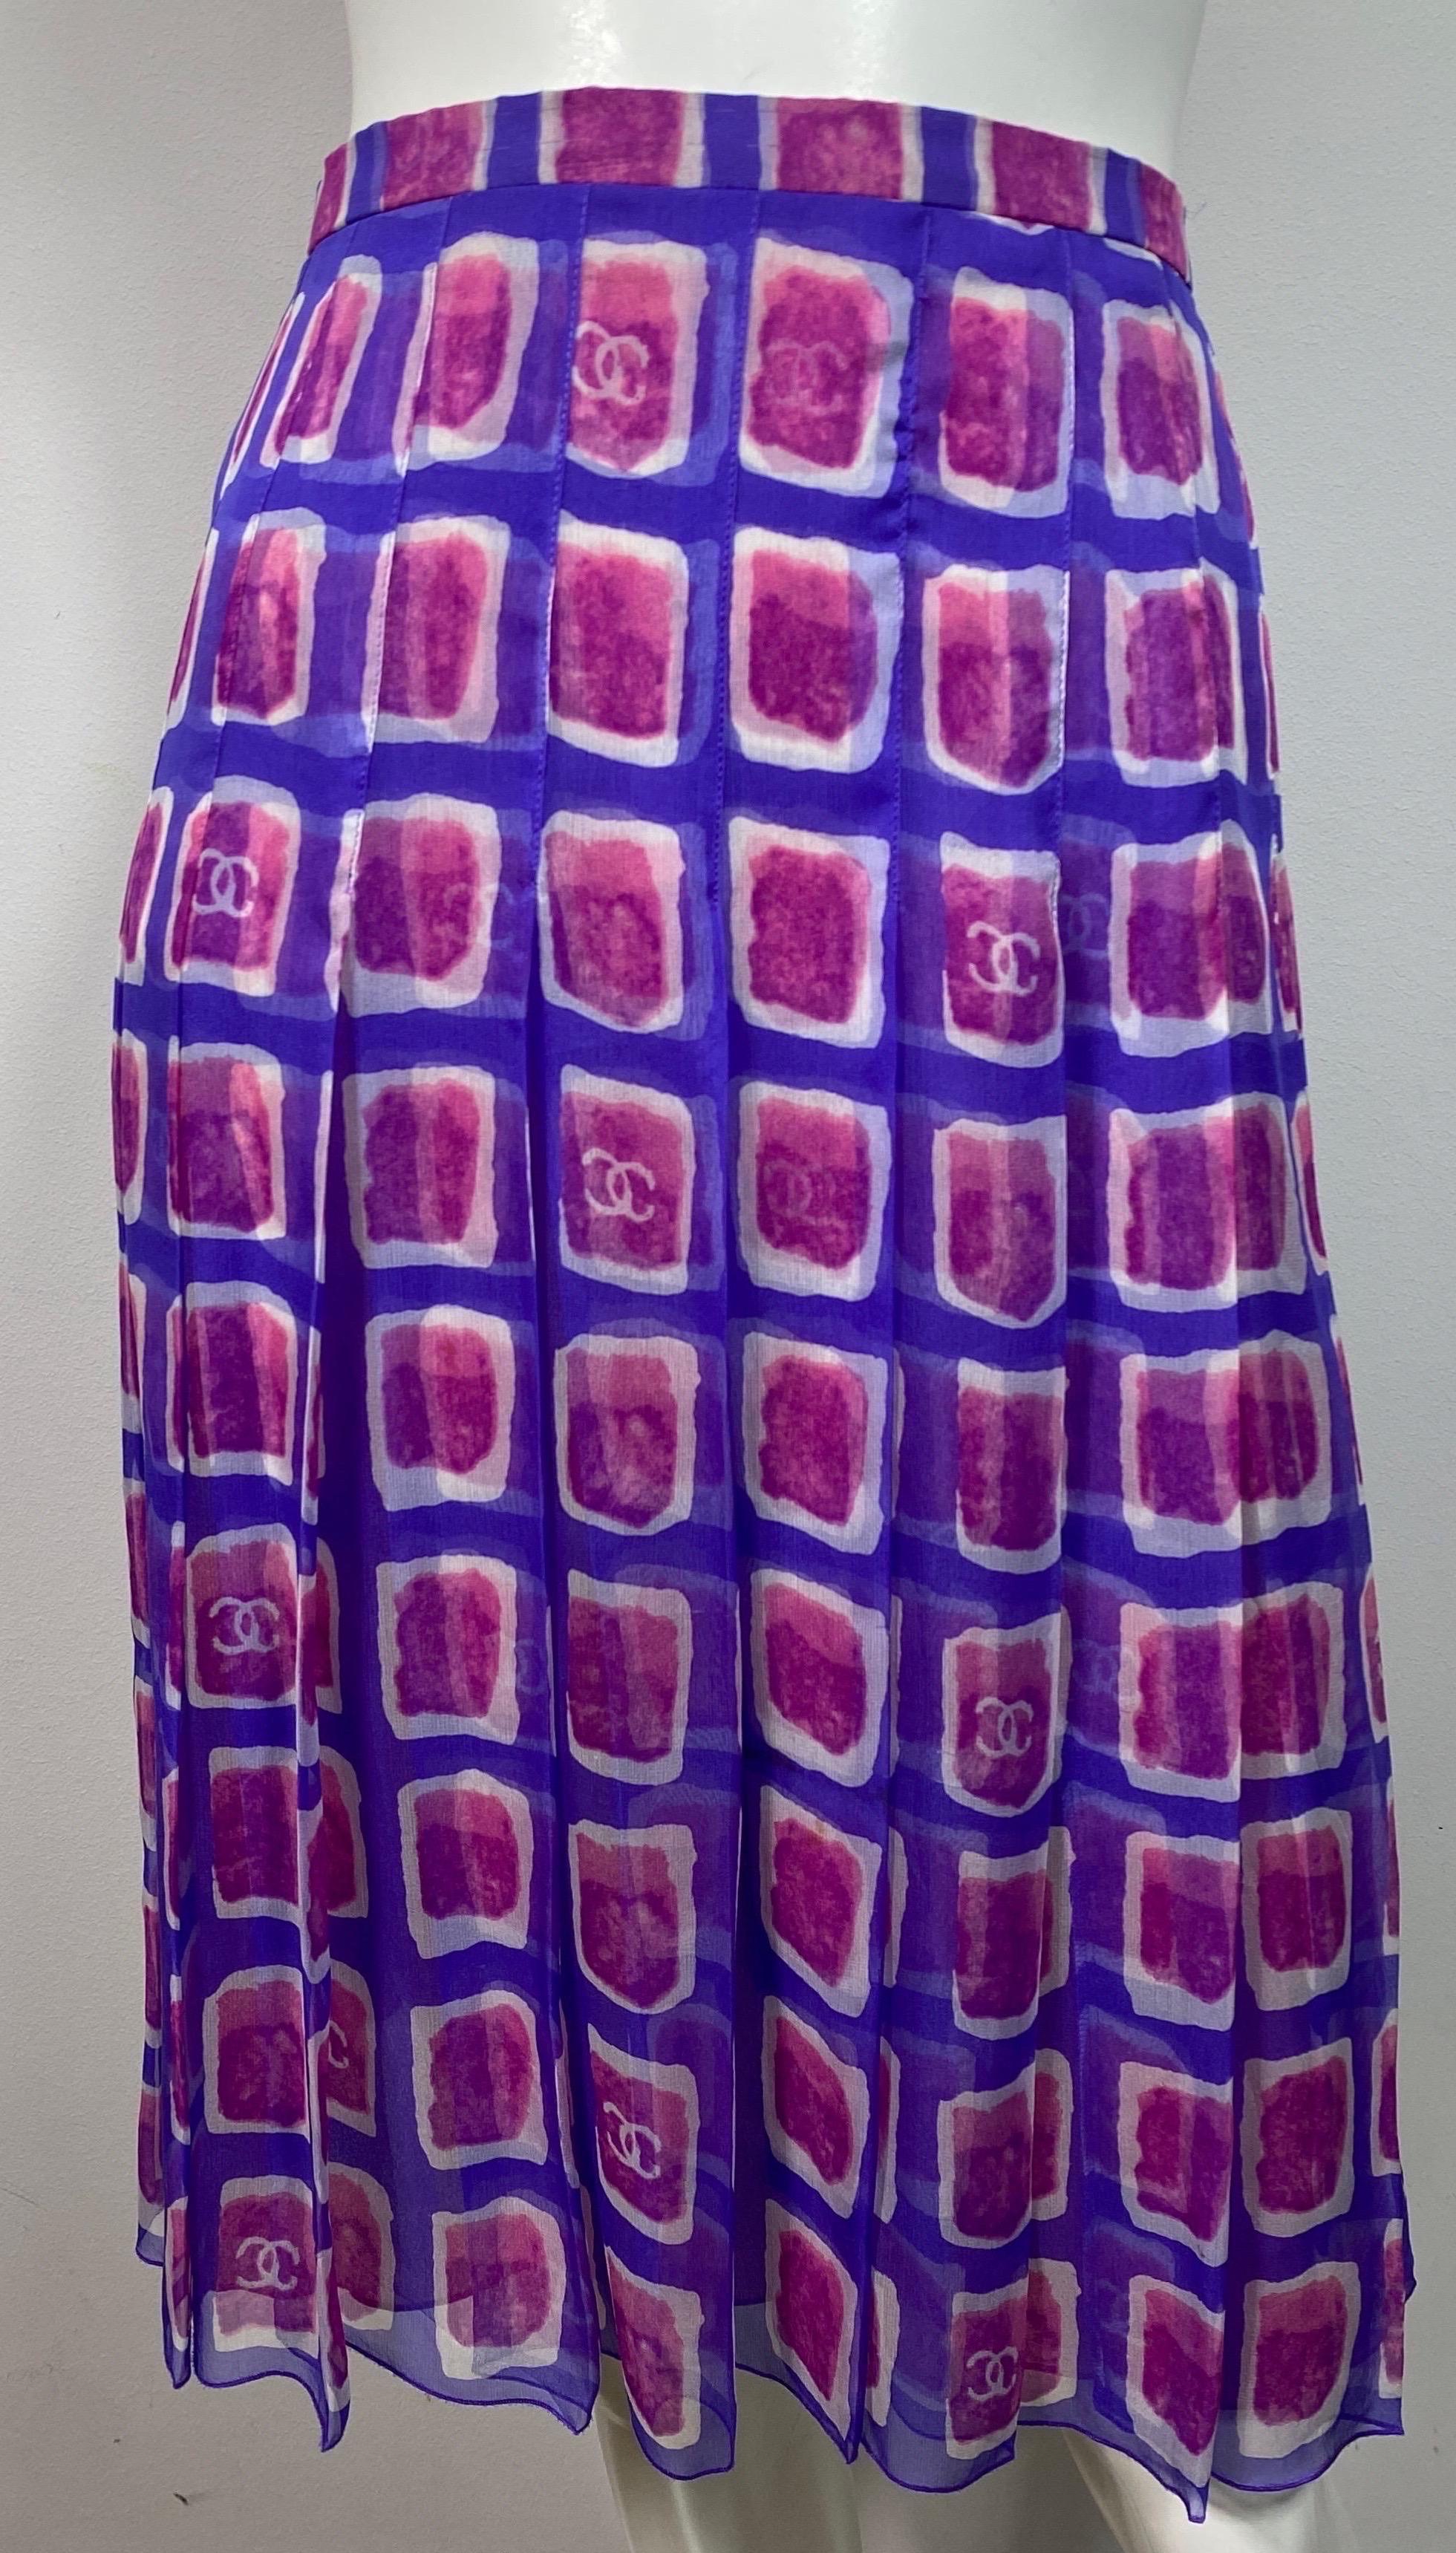 Chanel 2001 Purple and Fuchsia Silk Print Skirt - Size 40 This vintage skirt is made of a purple silk chiffon that has watercolor looking squares made of Fuchsia and Ivory, some with the CC in the center. The skirt is lined in a magenta colored